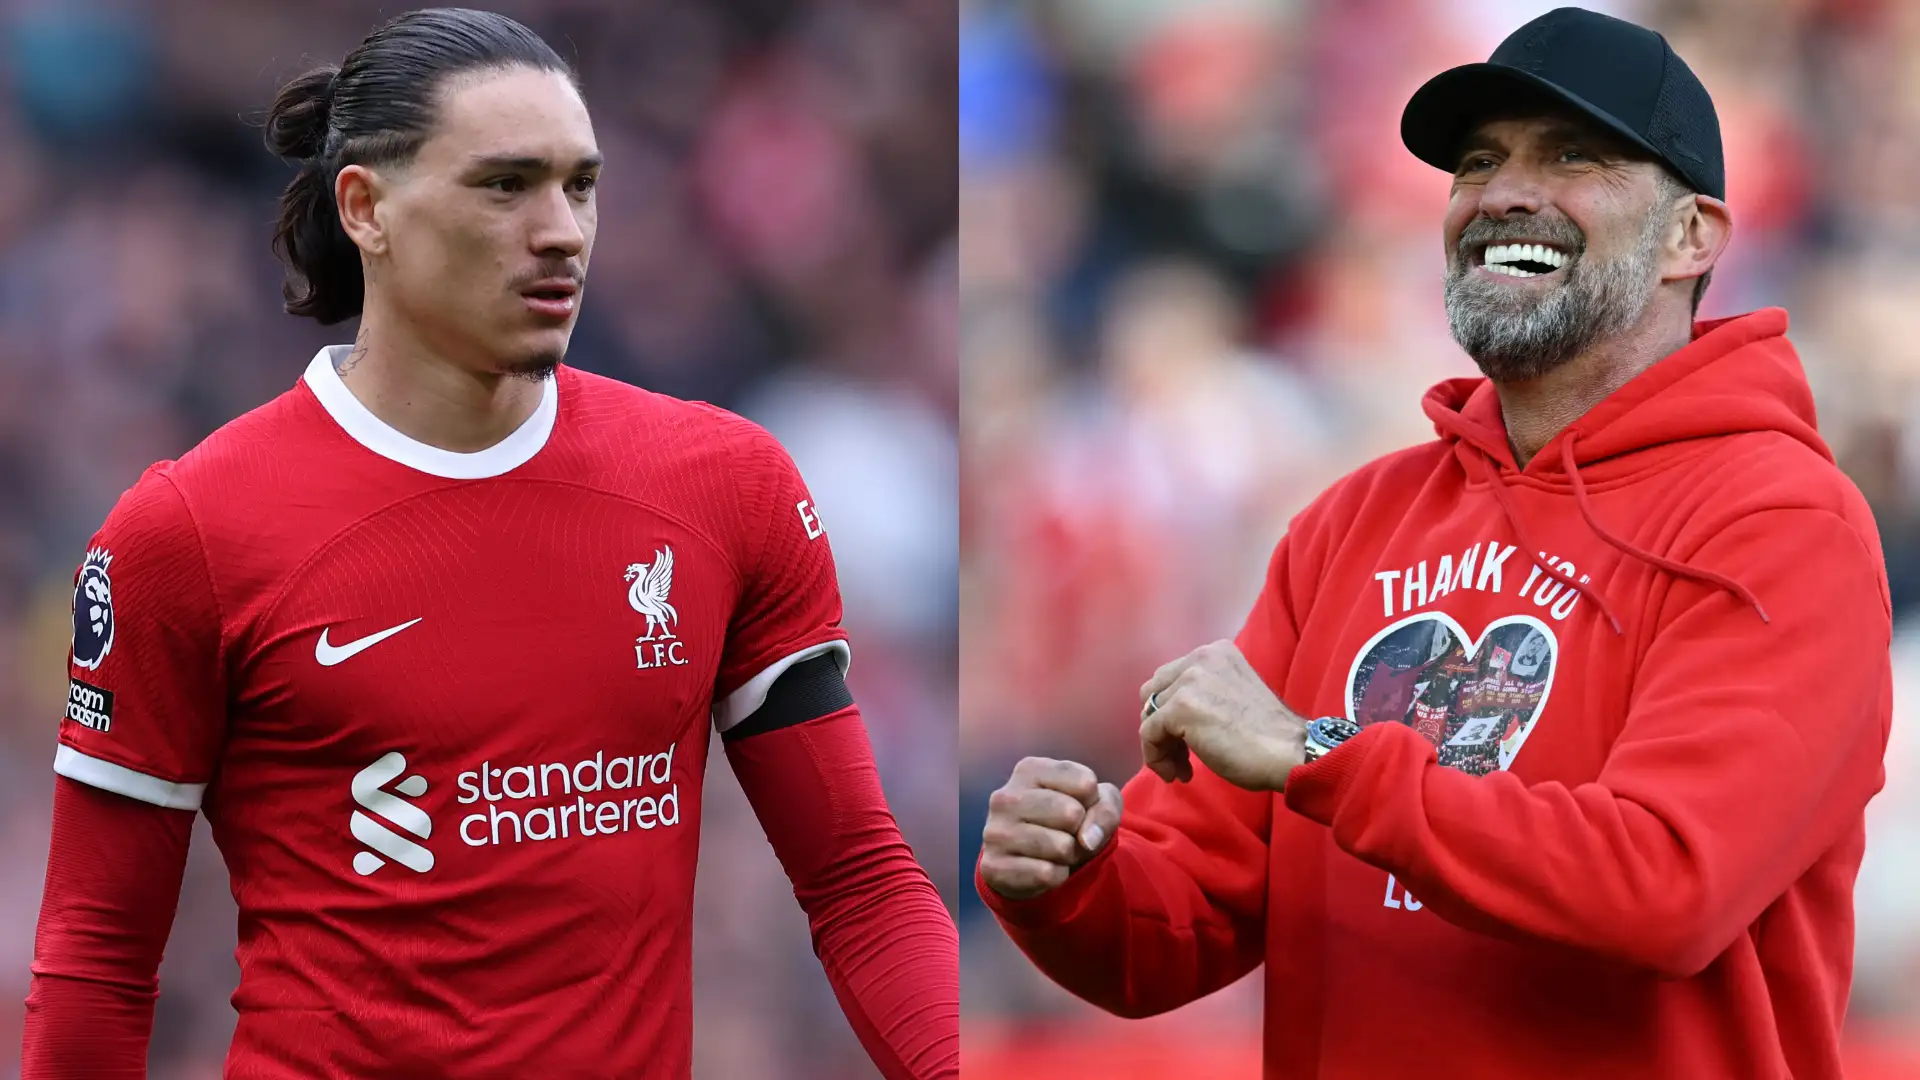 Darwin Nunez finally reveals what he thinks about Jurgen Klopp’s Liverpool exit after guard of honour controversy in beloved manager’s final game